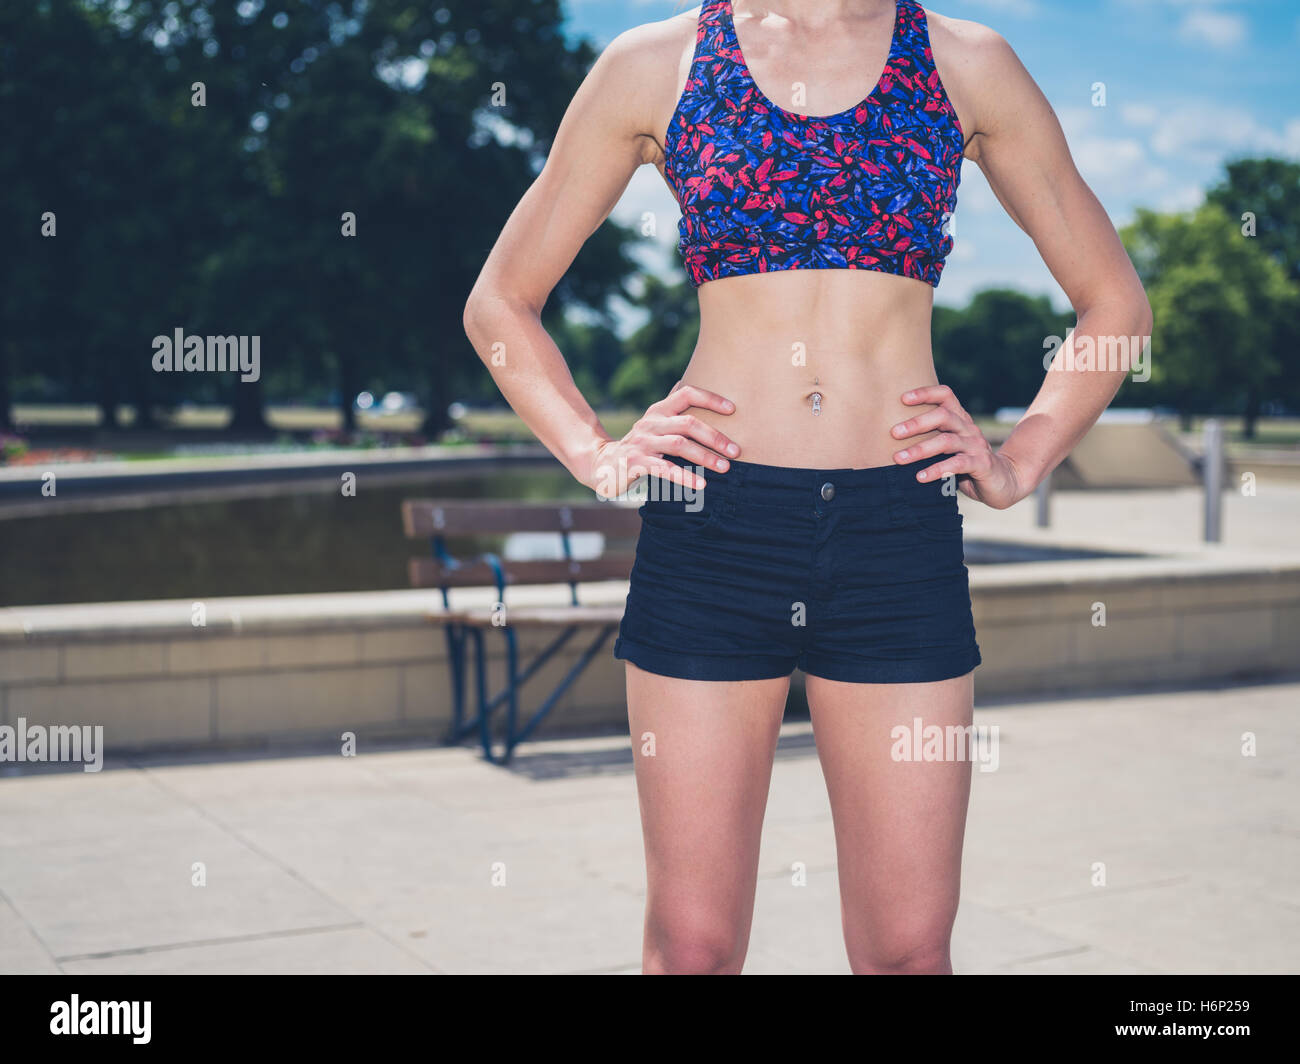 slim athletic woman torso abs belly wearing sportswear close up